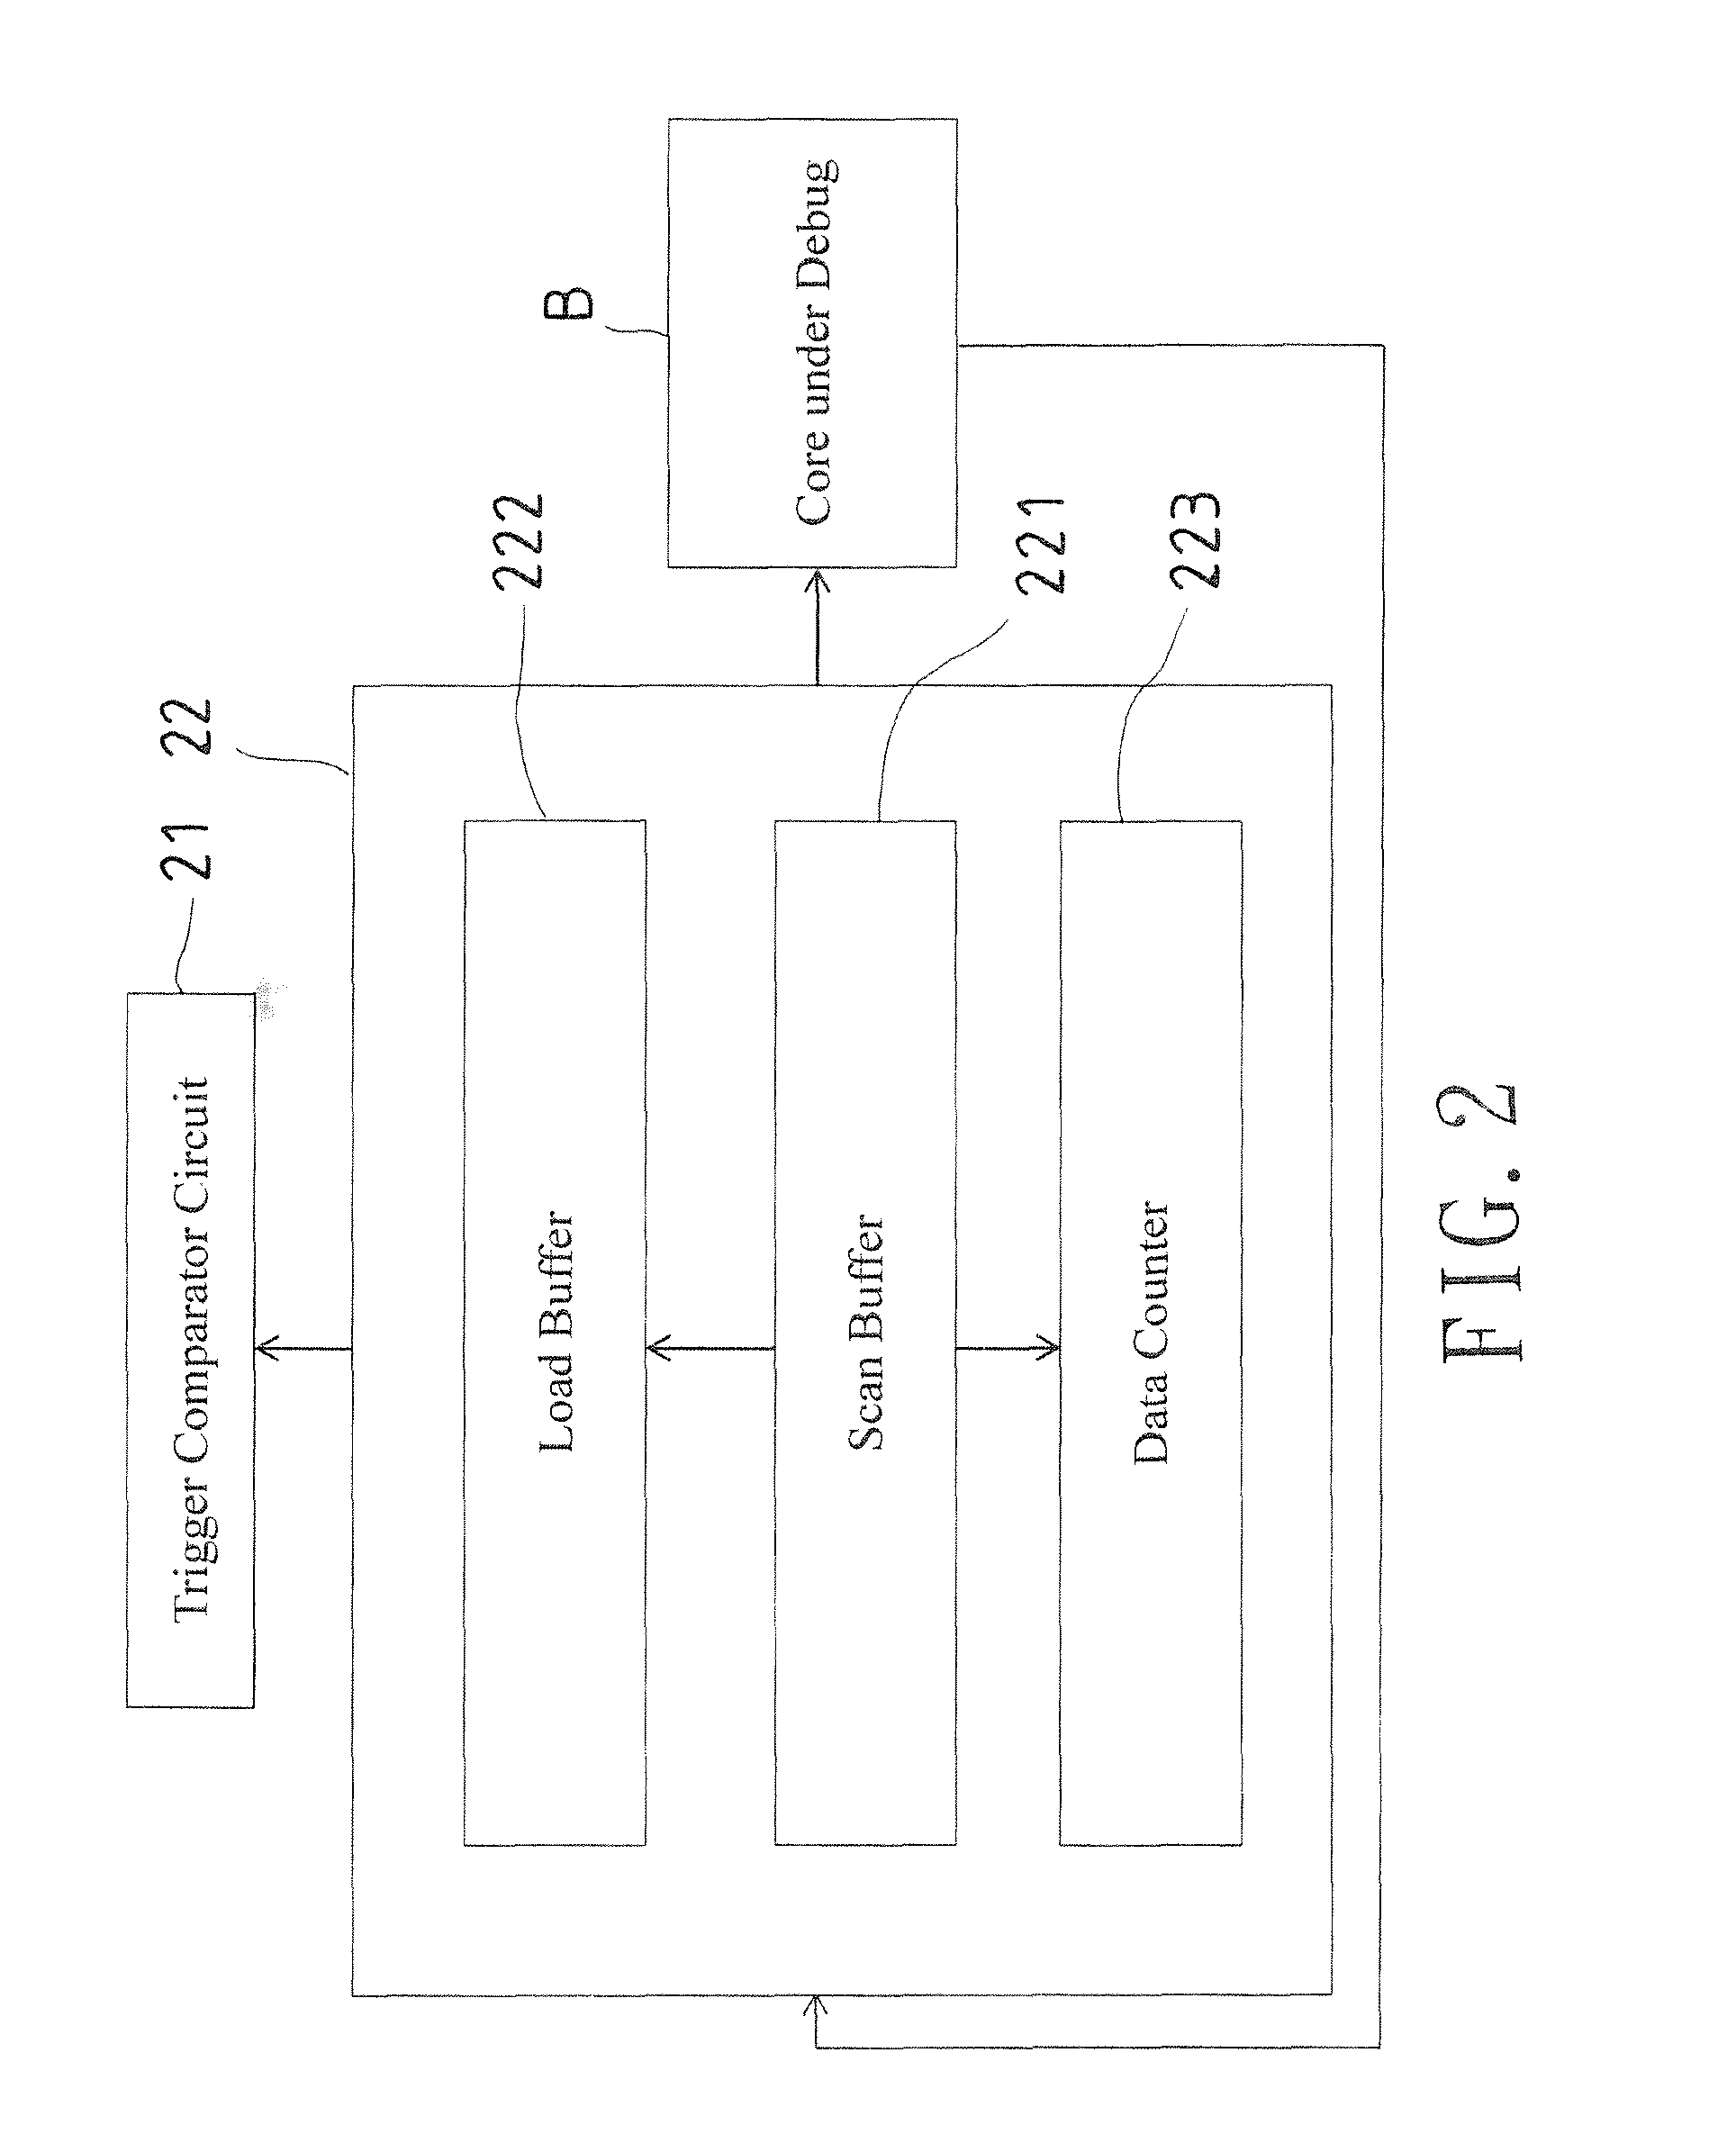 Debugging control system using inside core event as trigger condition and method of the same